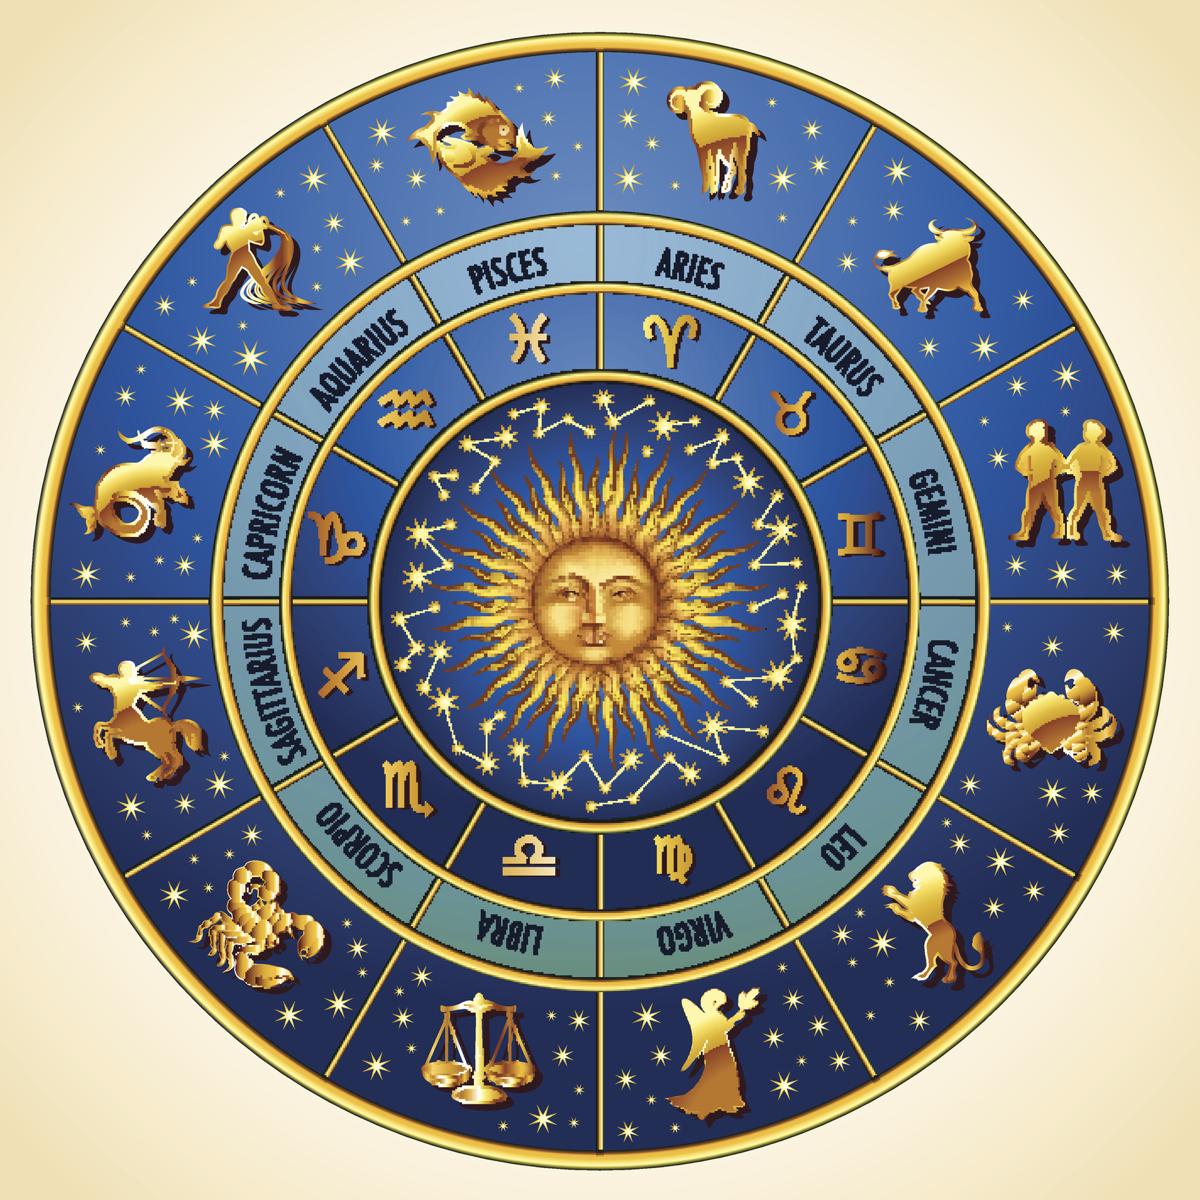 Different Zodiac Signs And Their Symbols - Reverasite